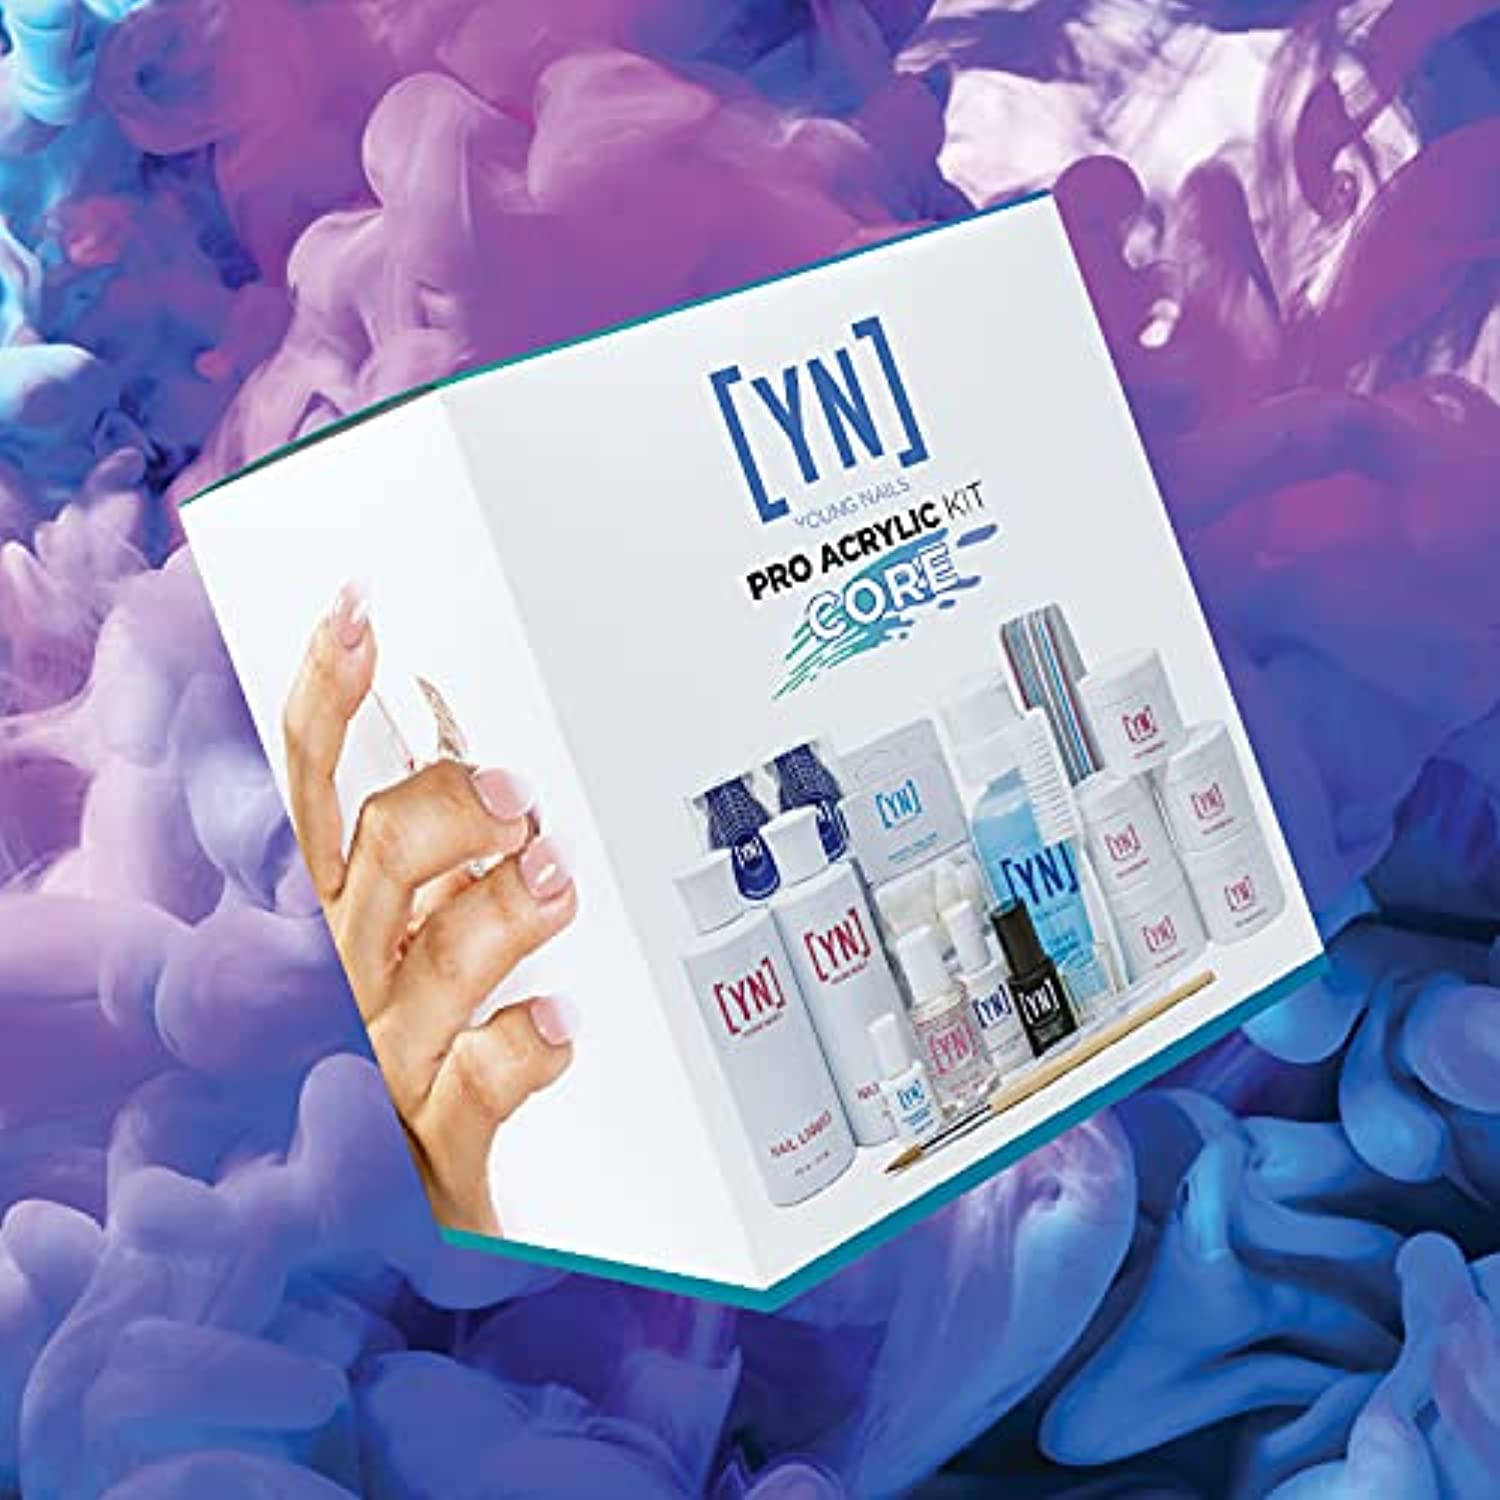 Young Nails Professional Kits & Accessories for Home Nail Kit, Starter Kit, Beginners, and/or Nail Professionals